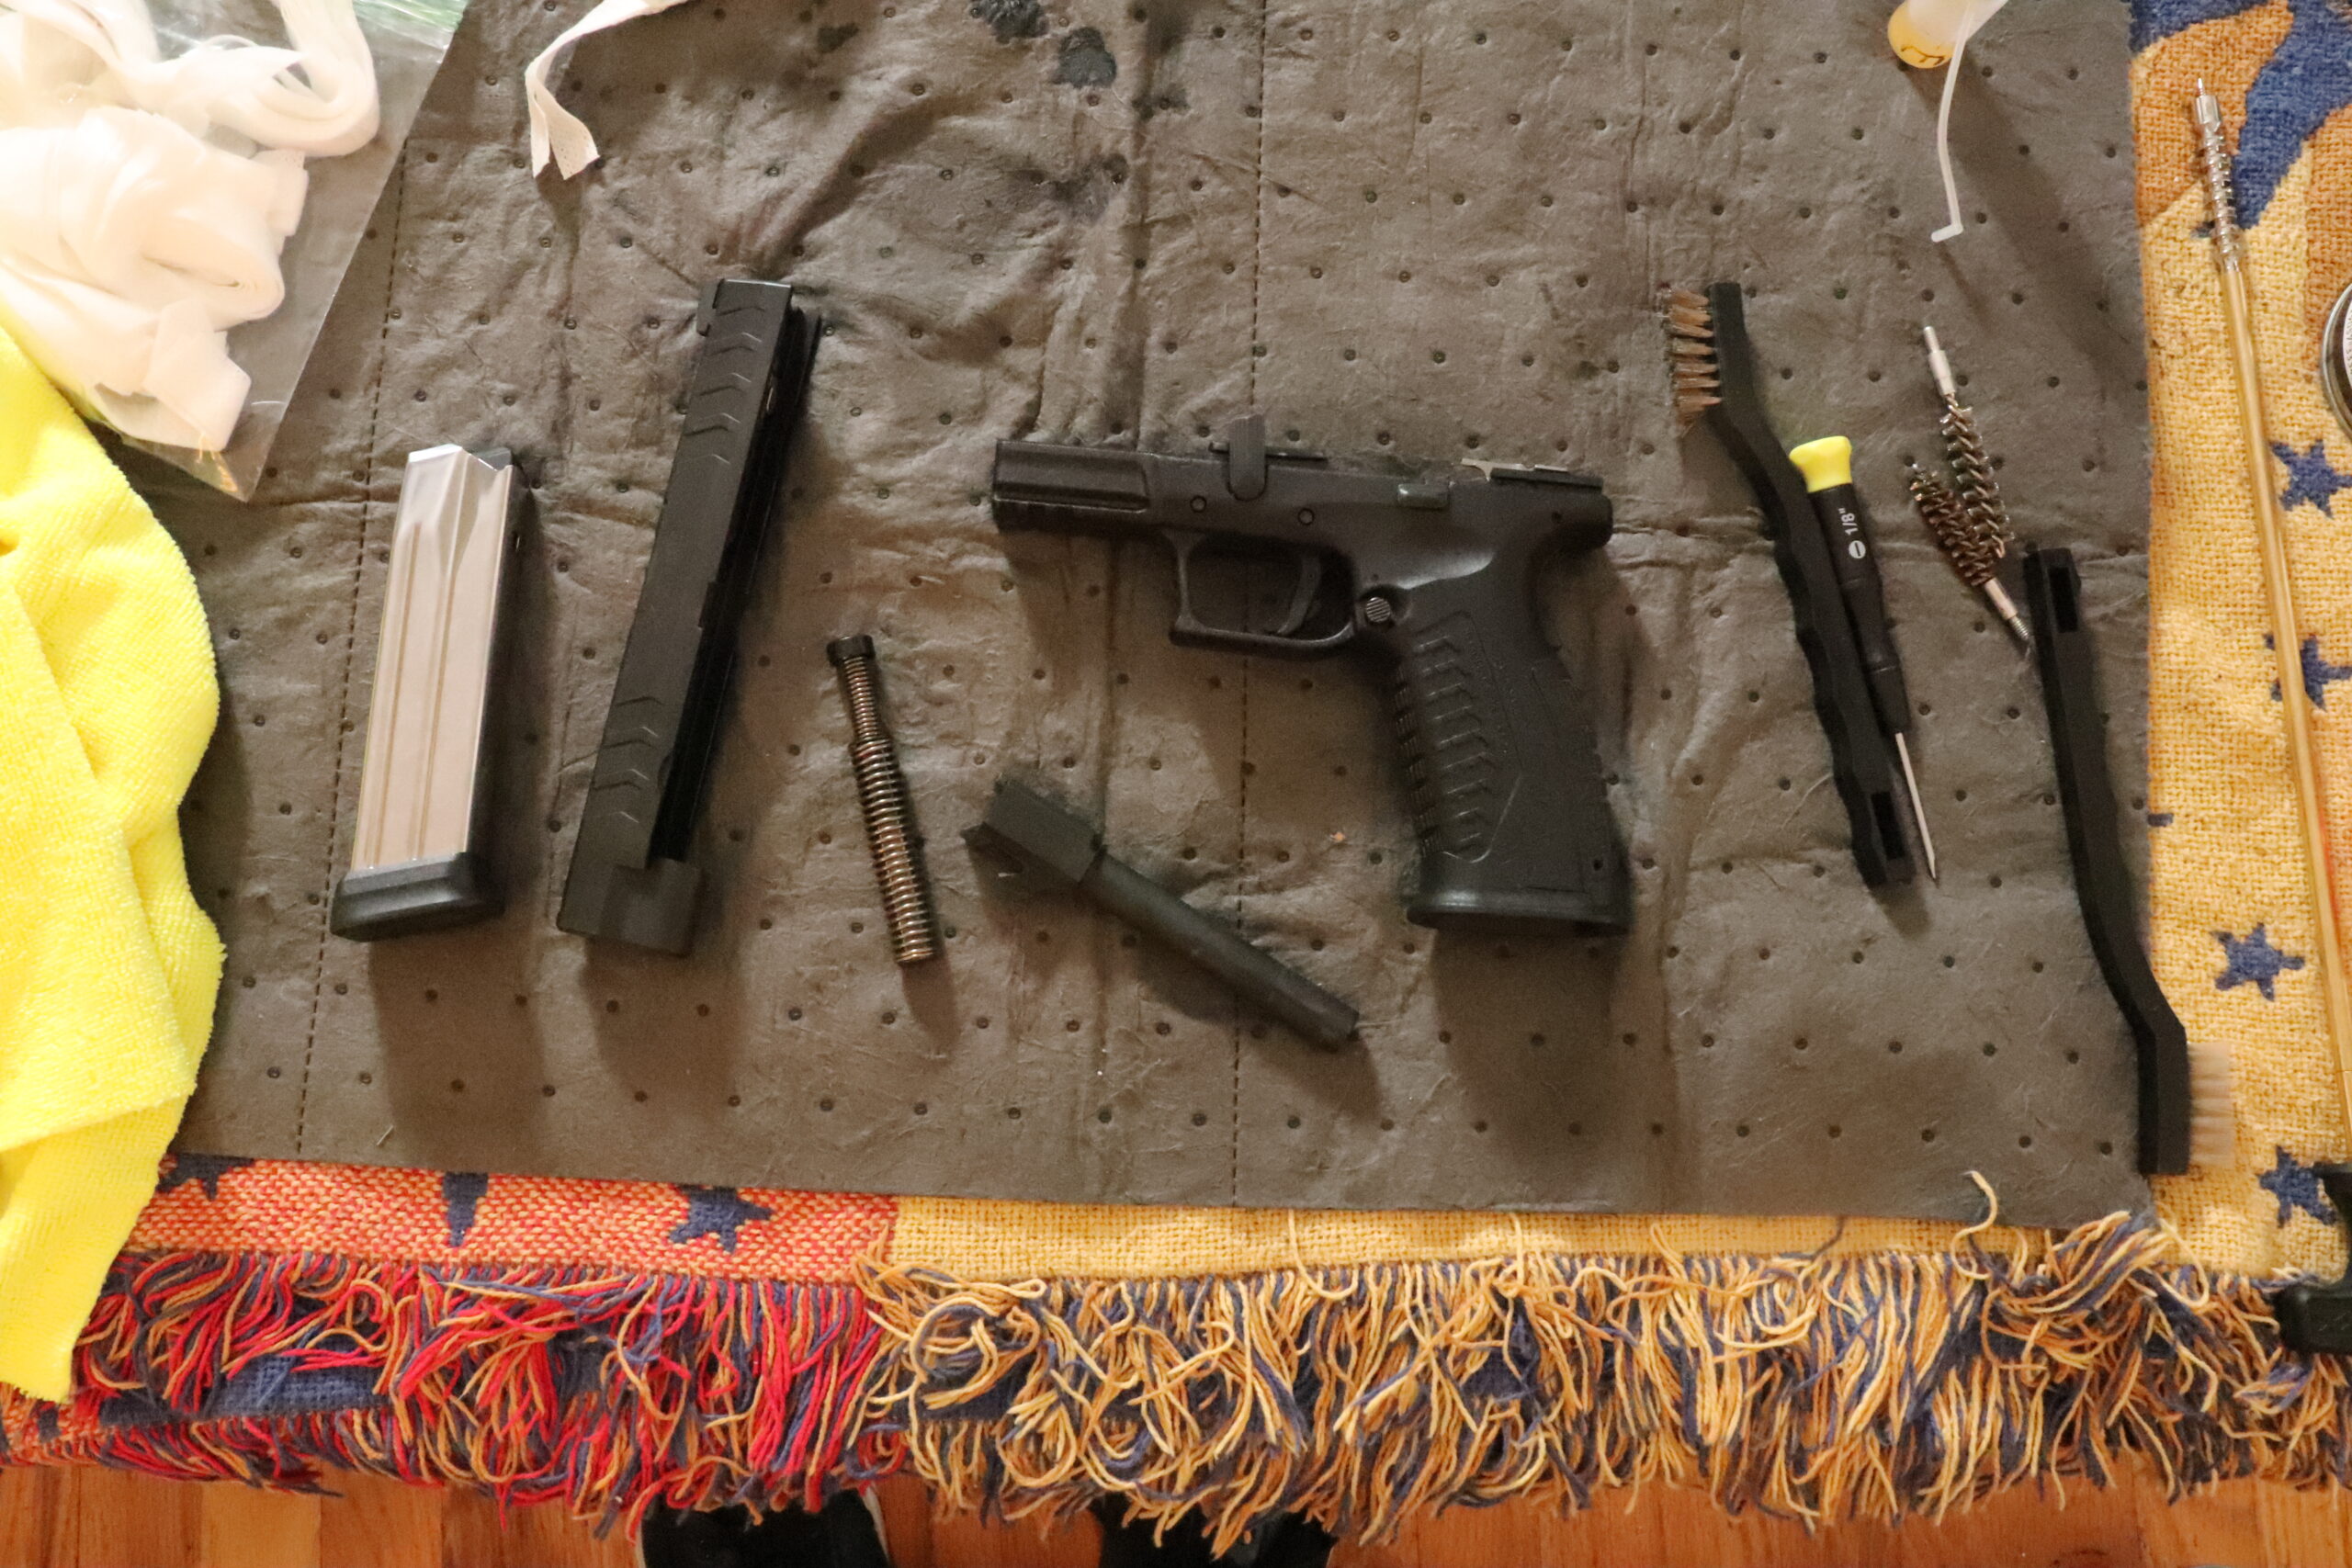 Springfield armory xds waiting to be cleaned and oiled